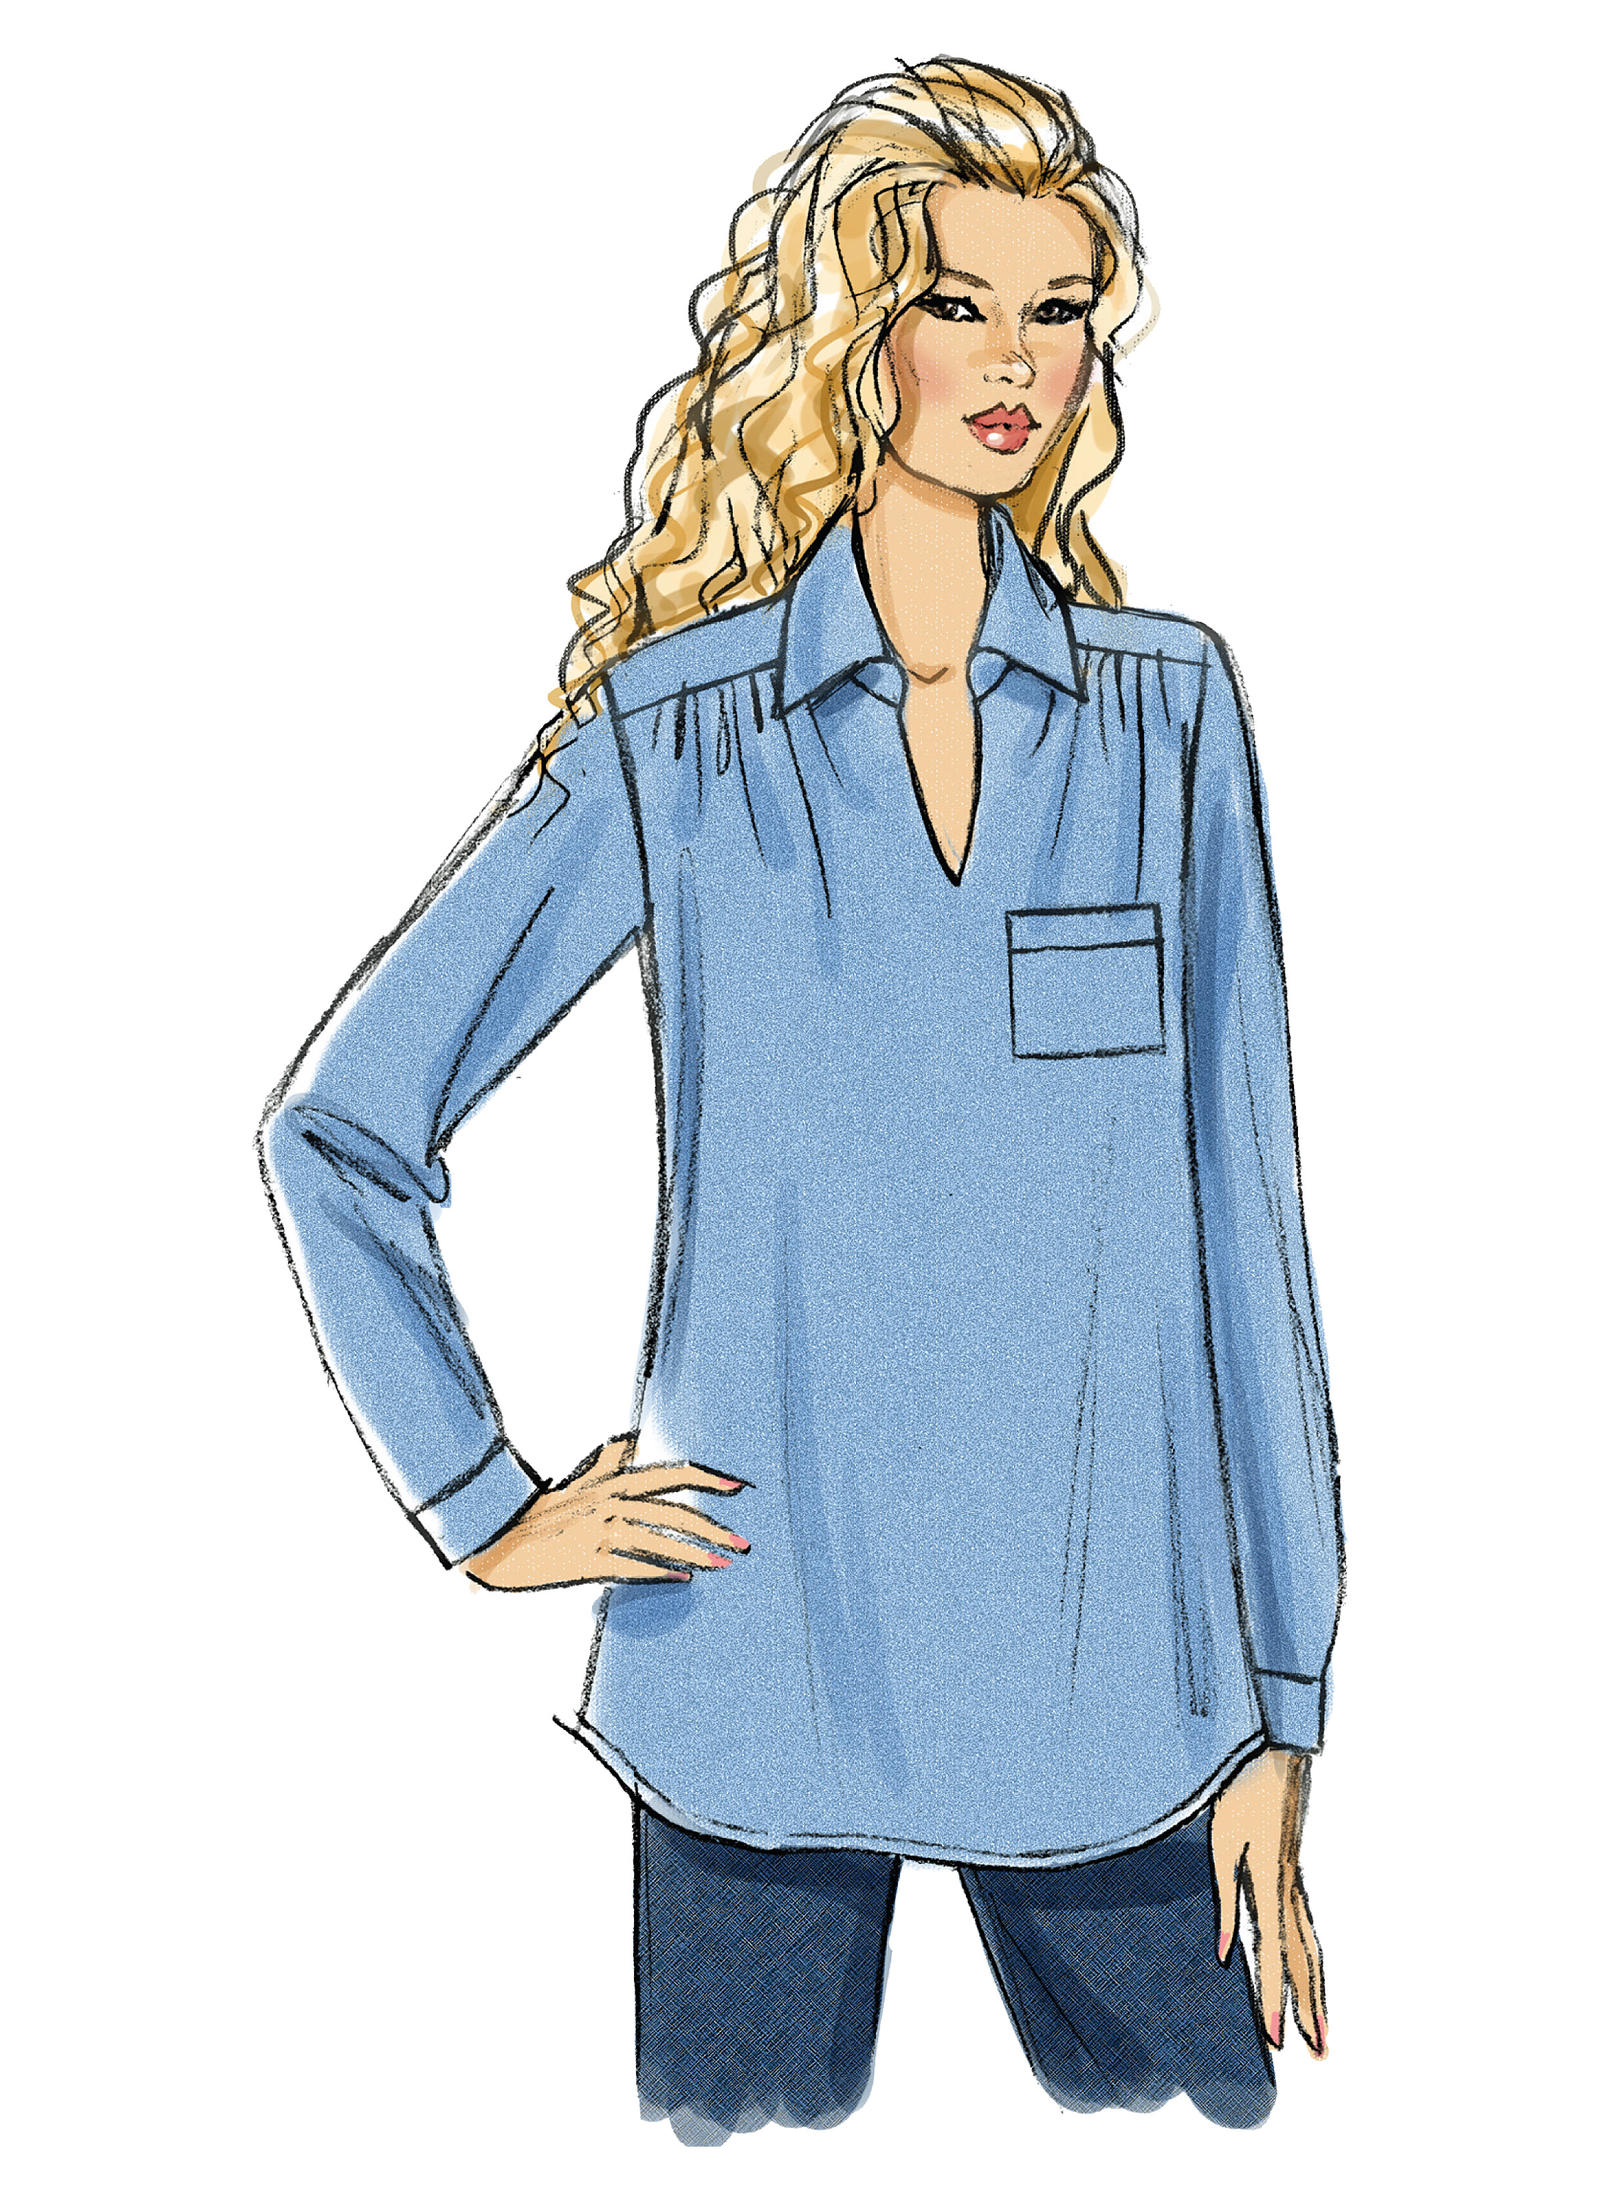 Drawing of a woman in a tucked top with a pocket